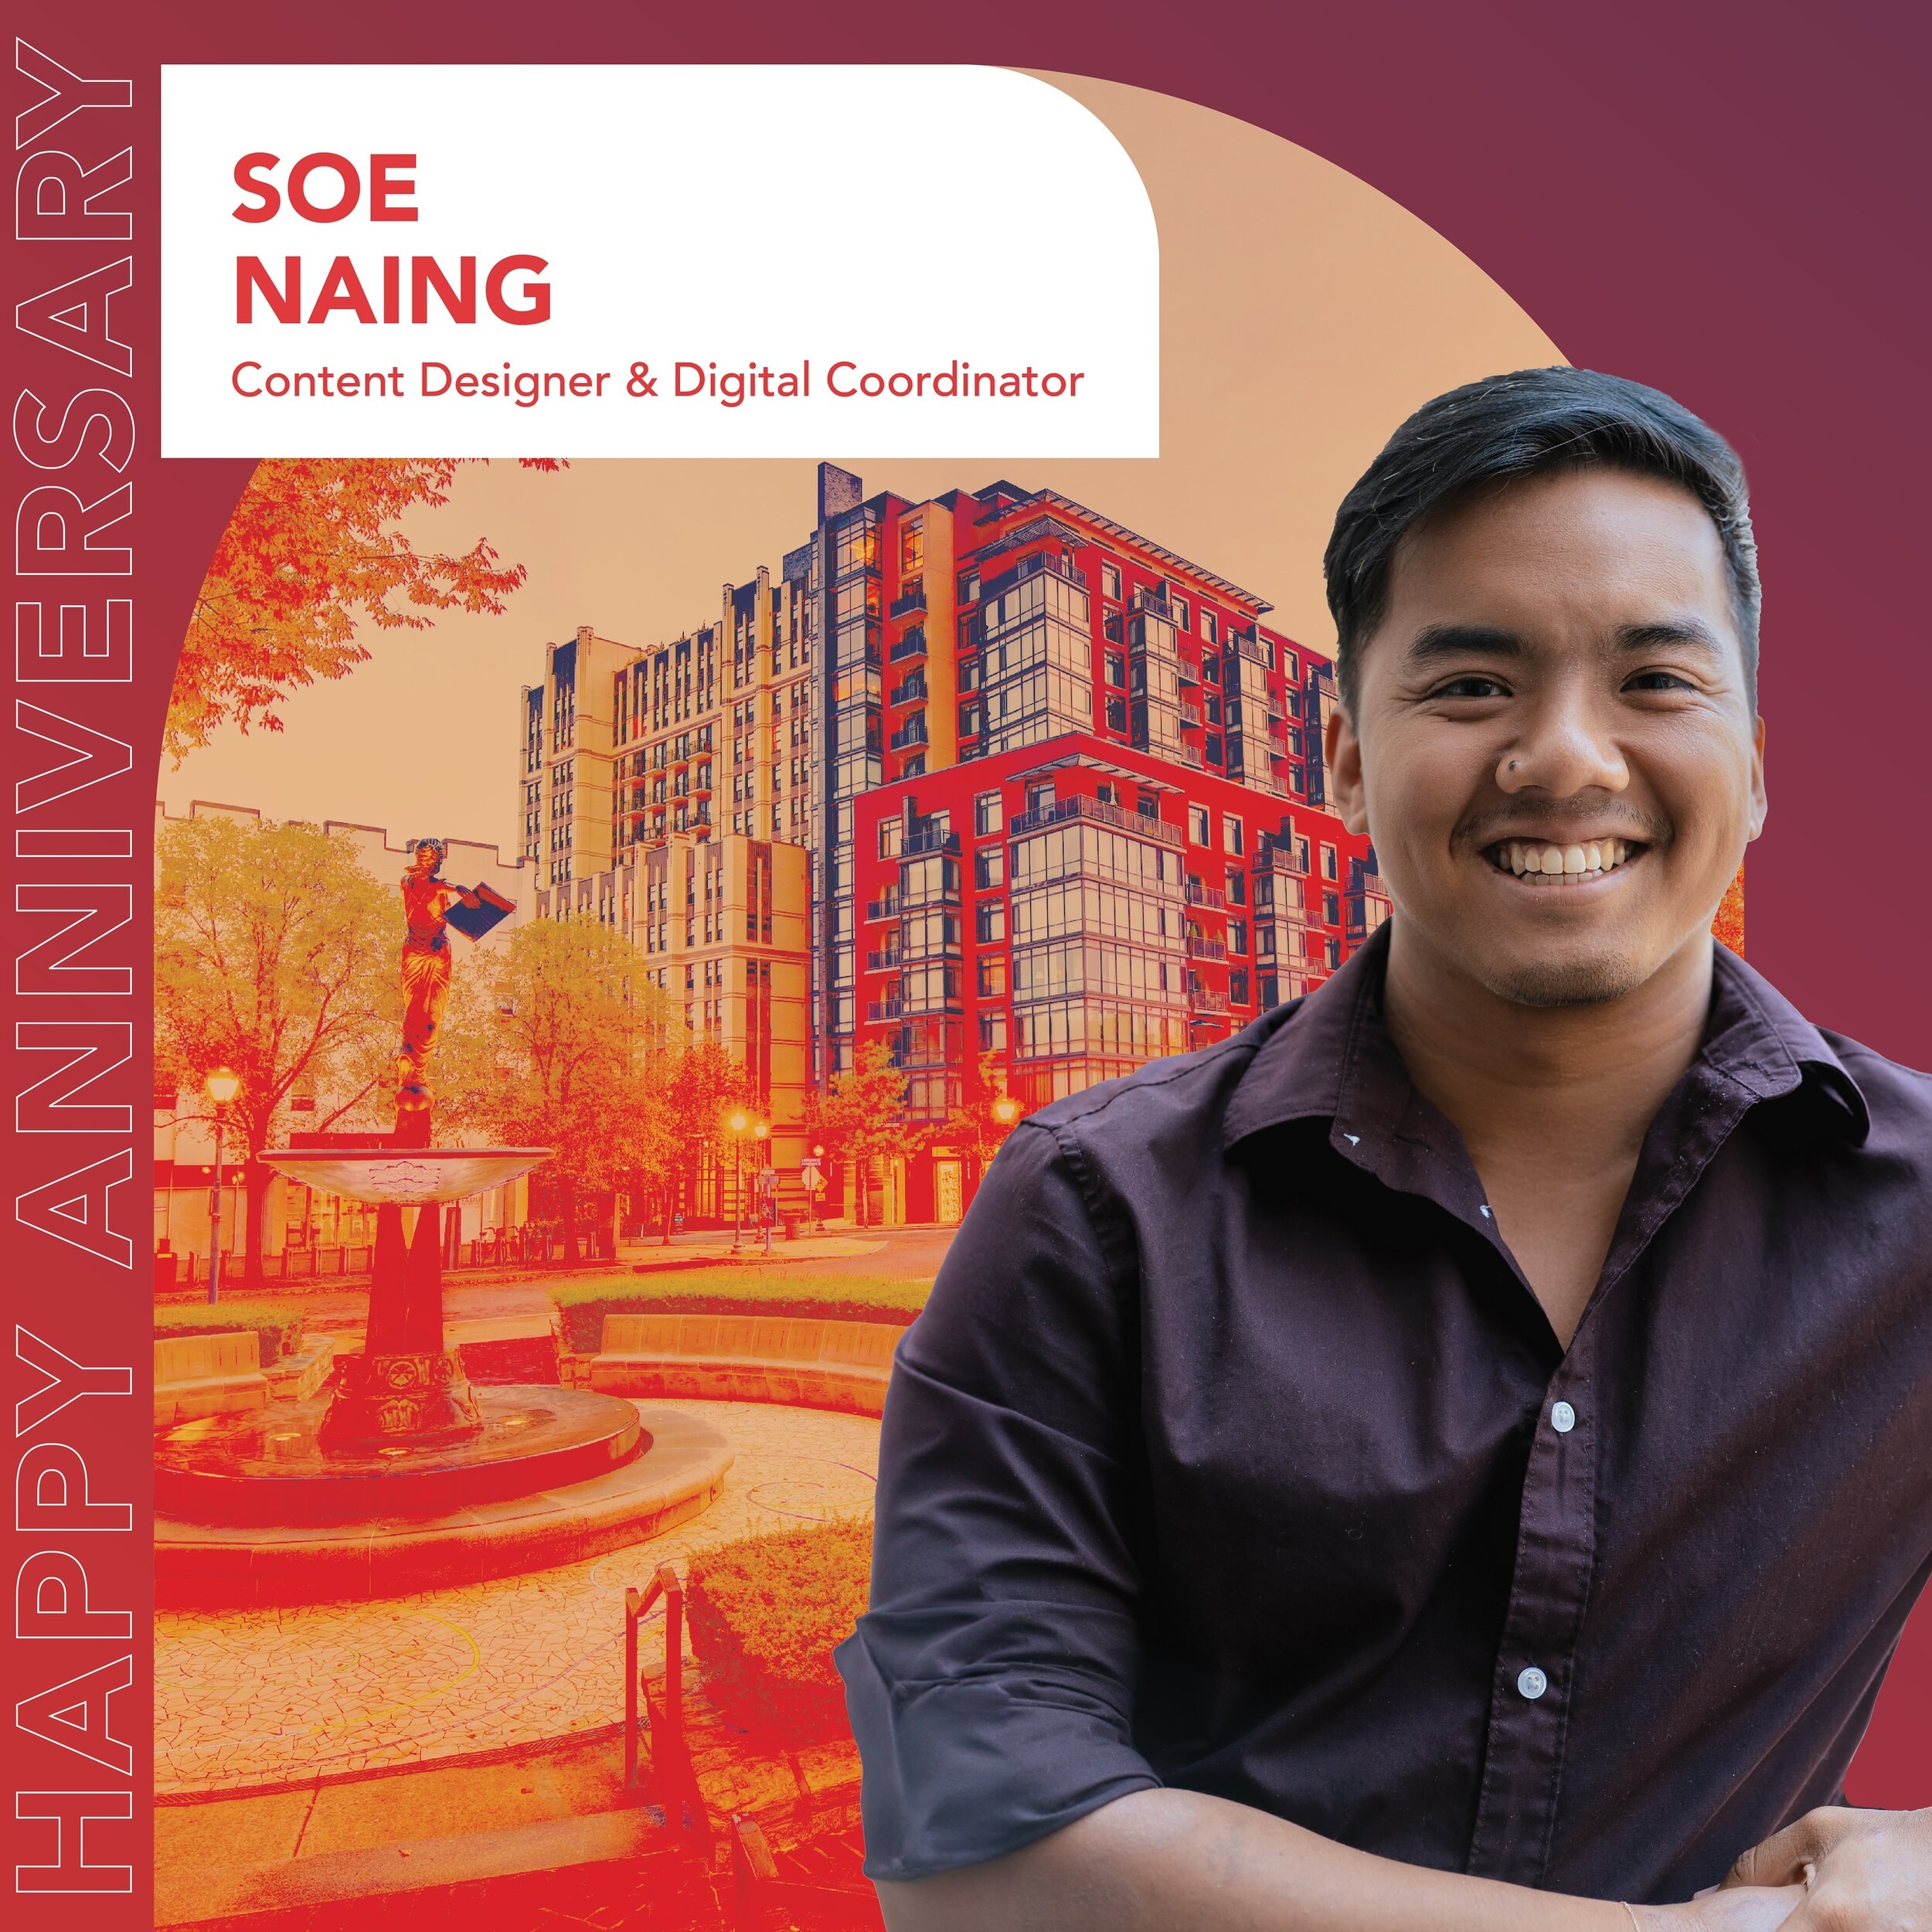 Happy one-year anniversary to #TeamLINK Content Designer and Digital Coordinator @soeso.co . Soe does so much for us at LINK, including design, writing, and digital strategy! Soe is also a coffee expert and enthusiast, often educating our team on the